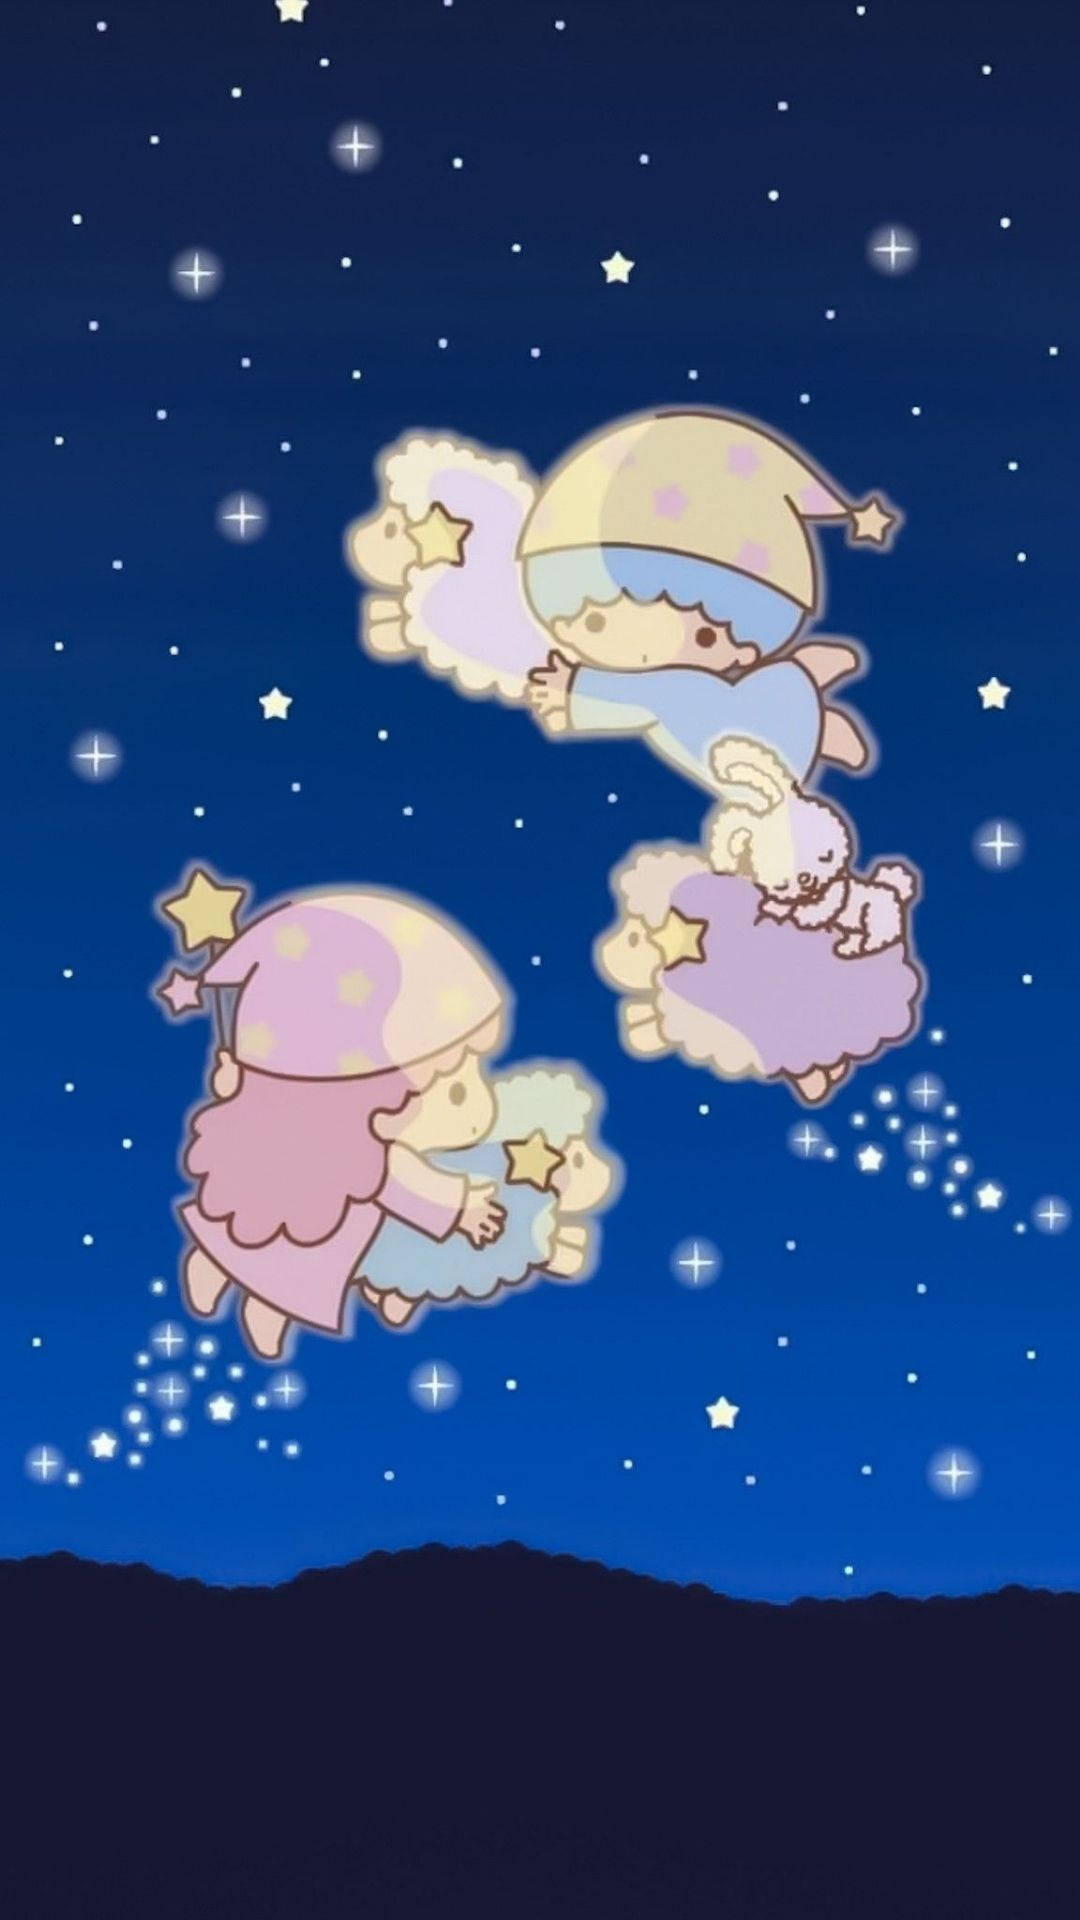 Chasing Little Twin Stars Background